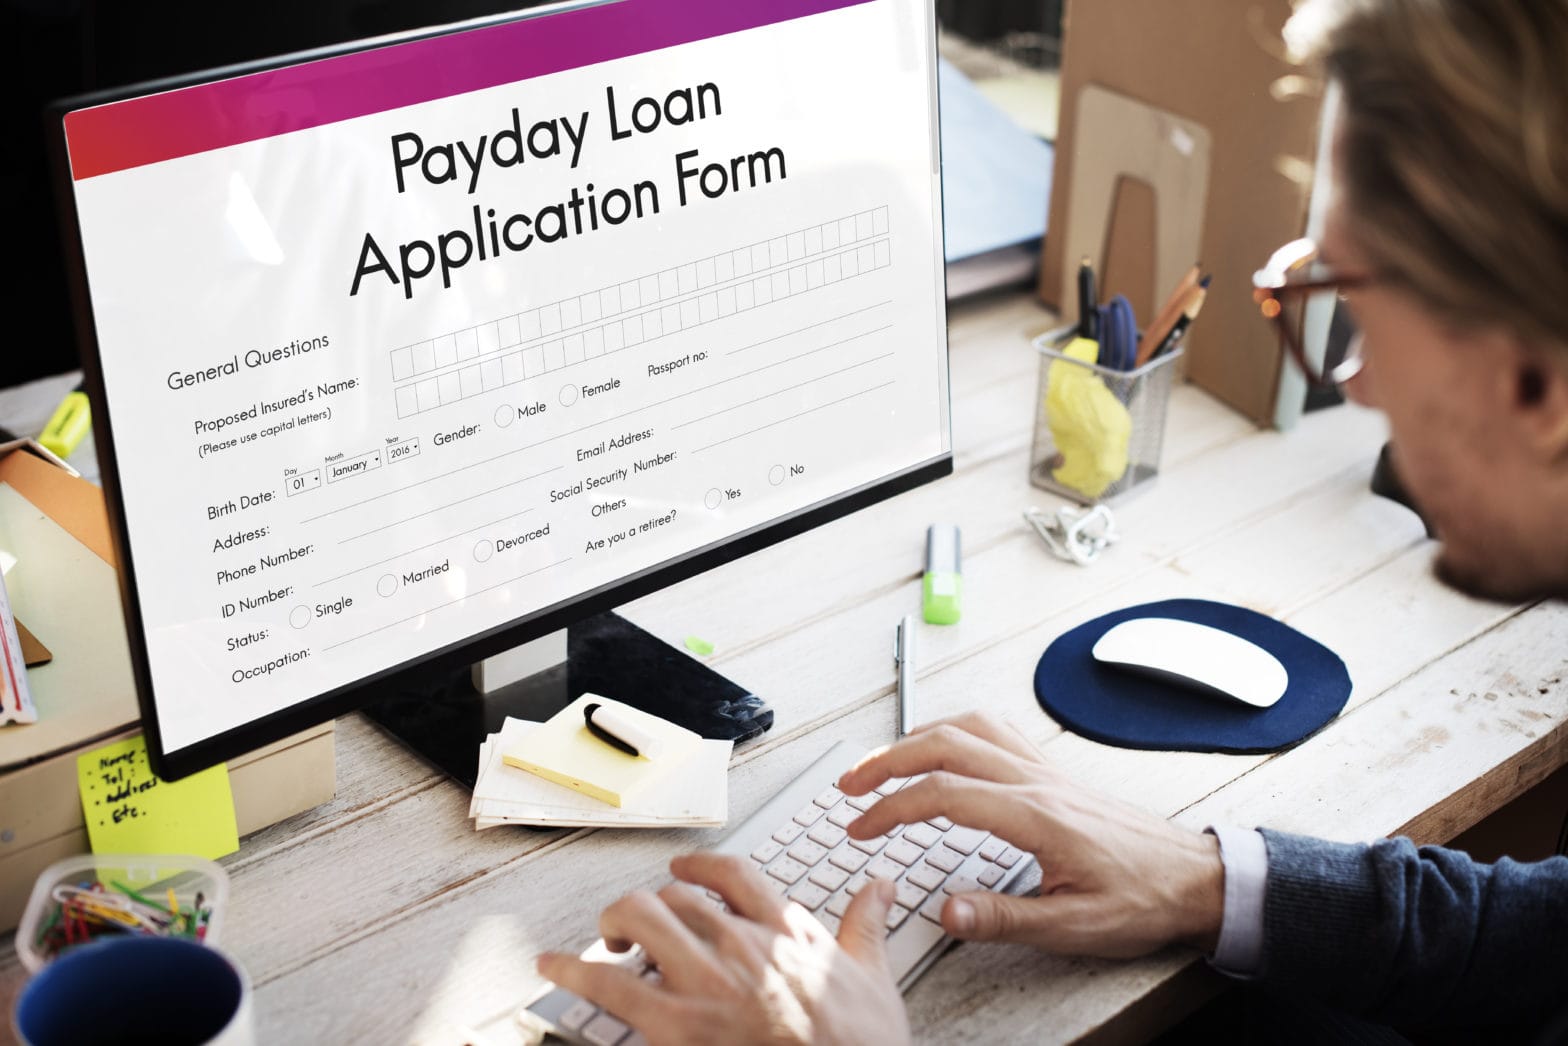 payday loan application form concept